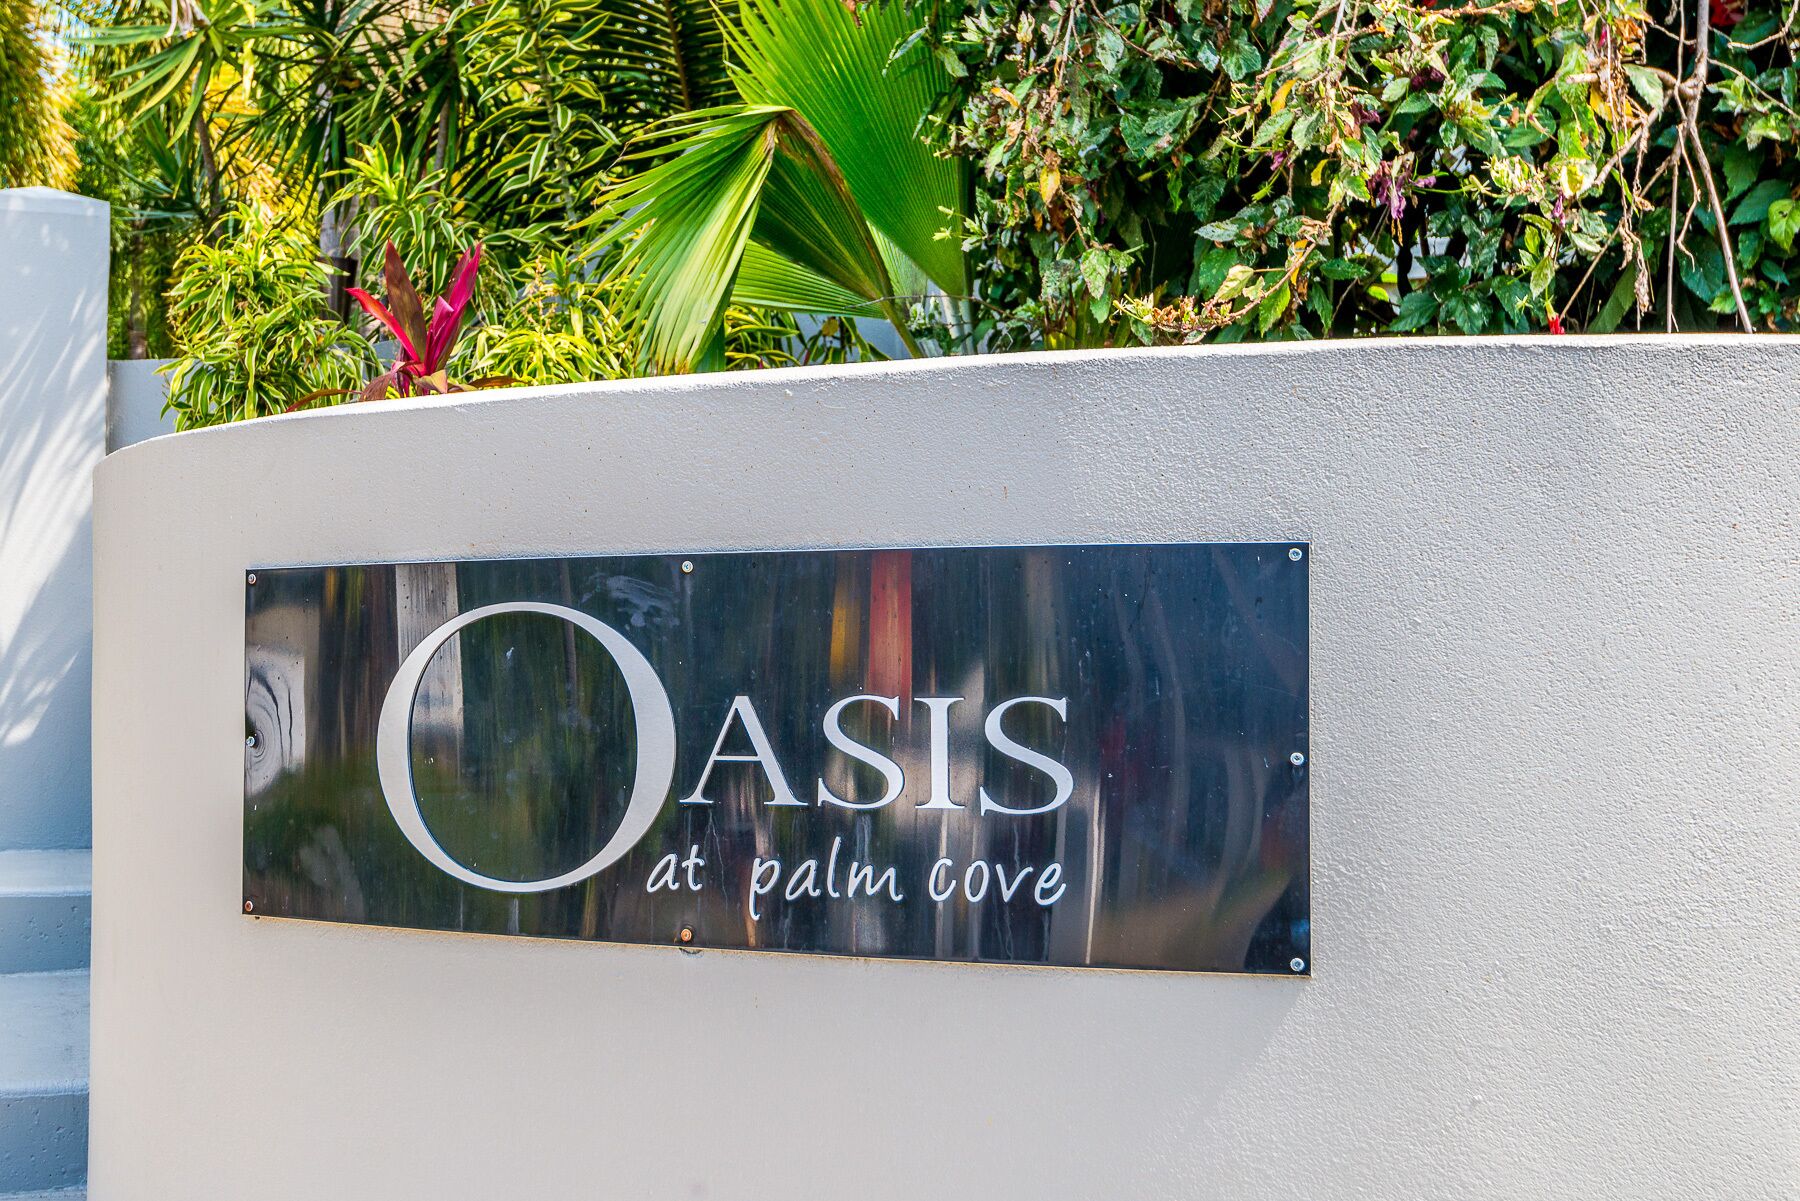 Oasis 8 Paradise at Palm Cove